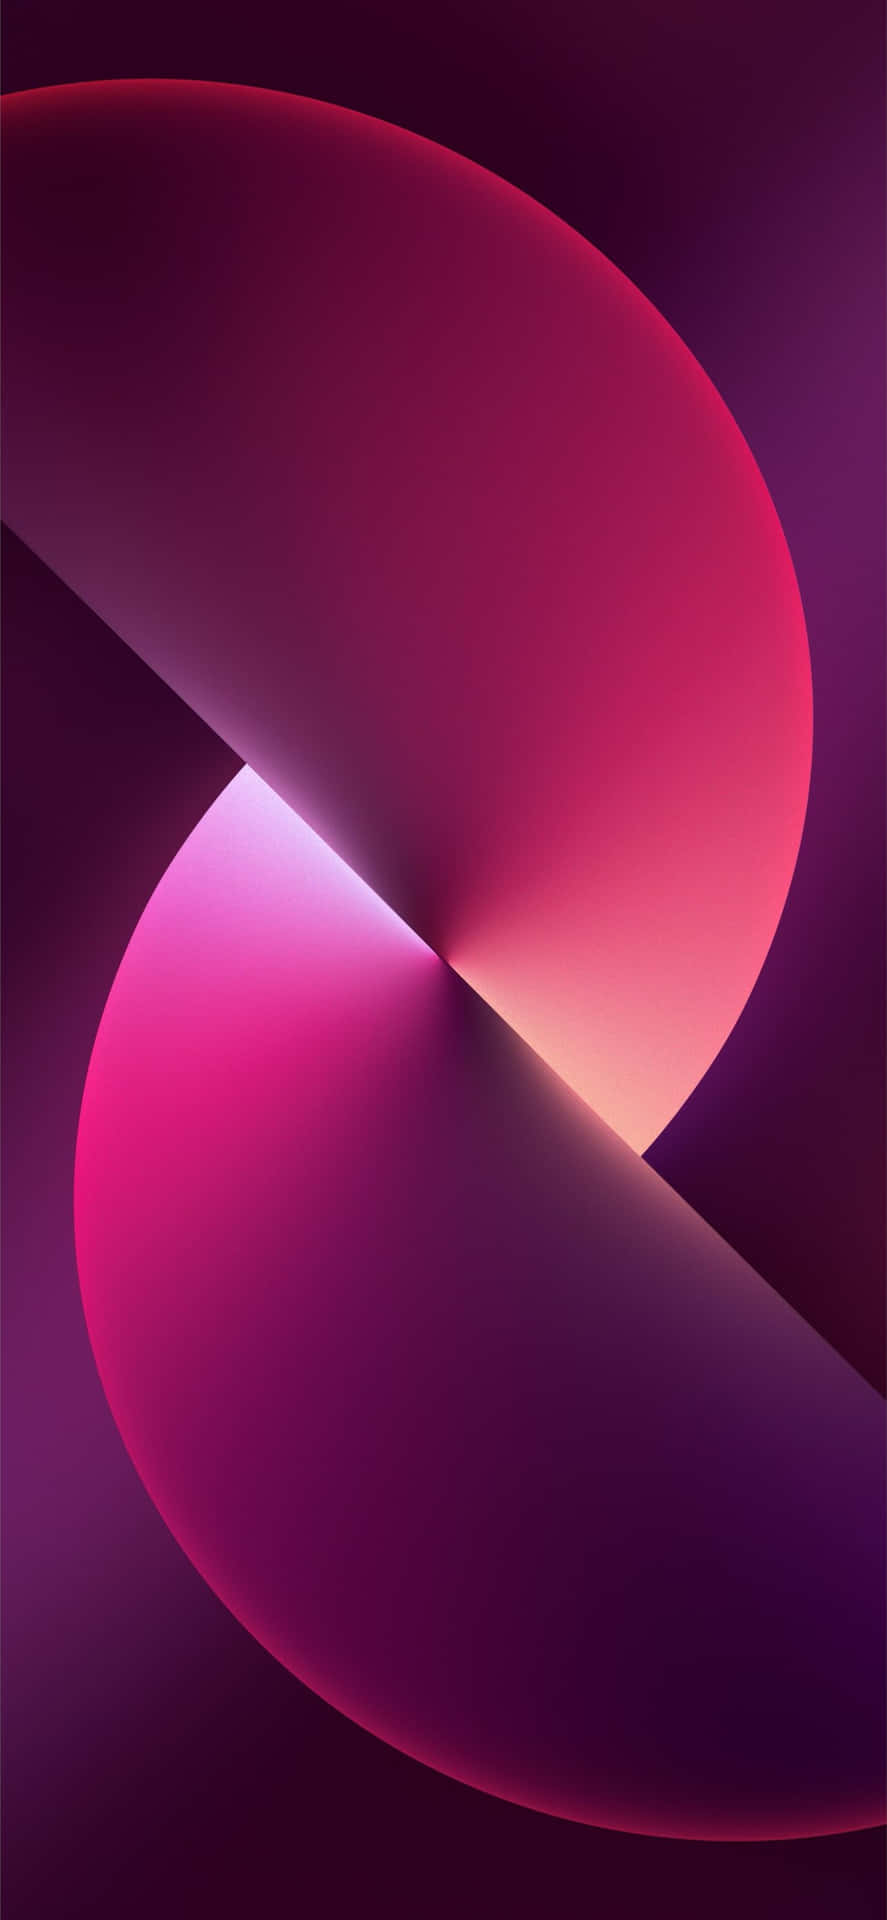 A Purple And Pink Abstract Background Wallpaper